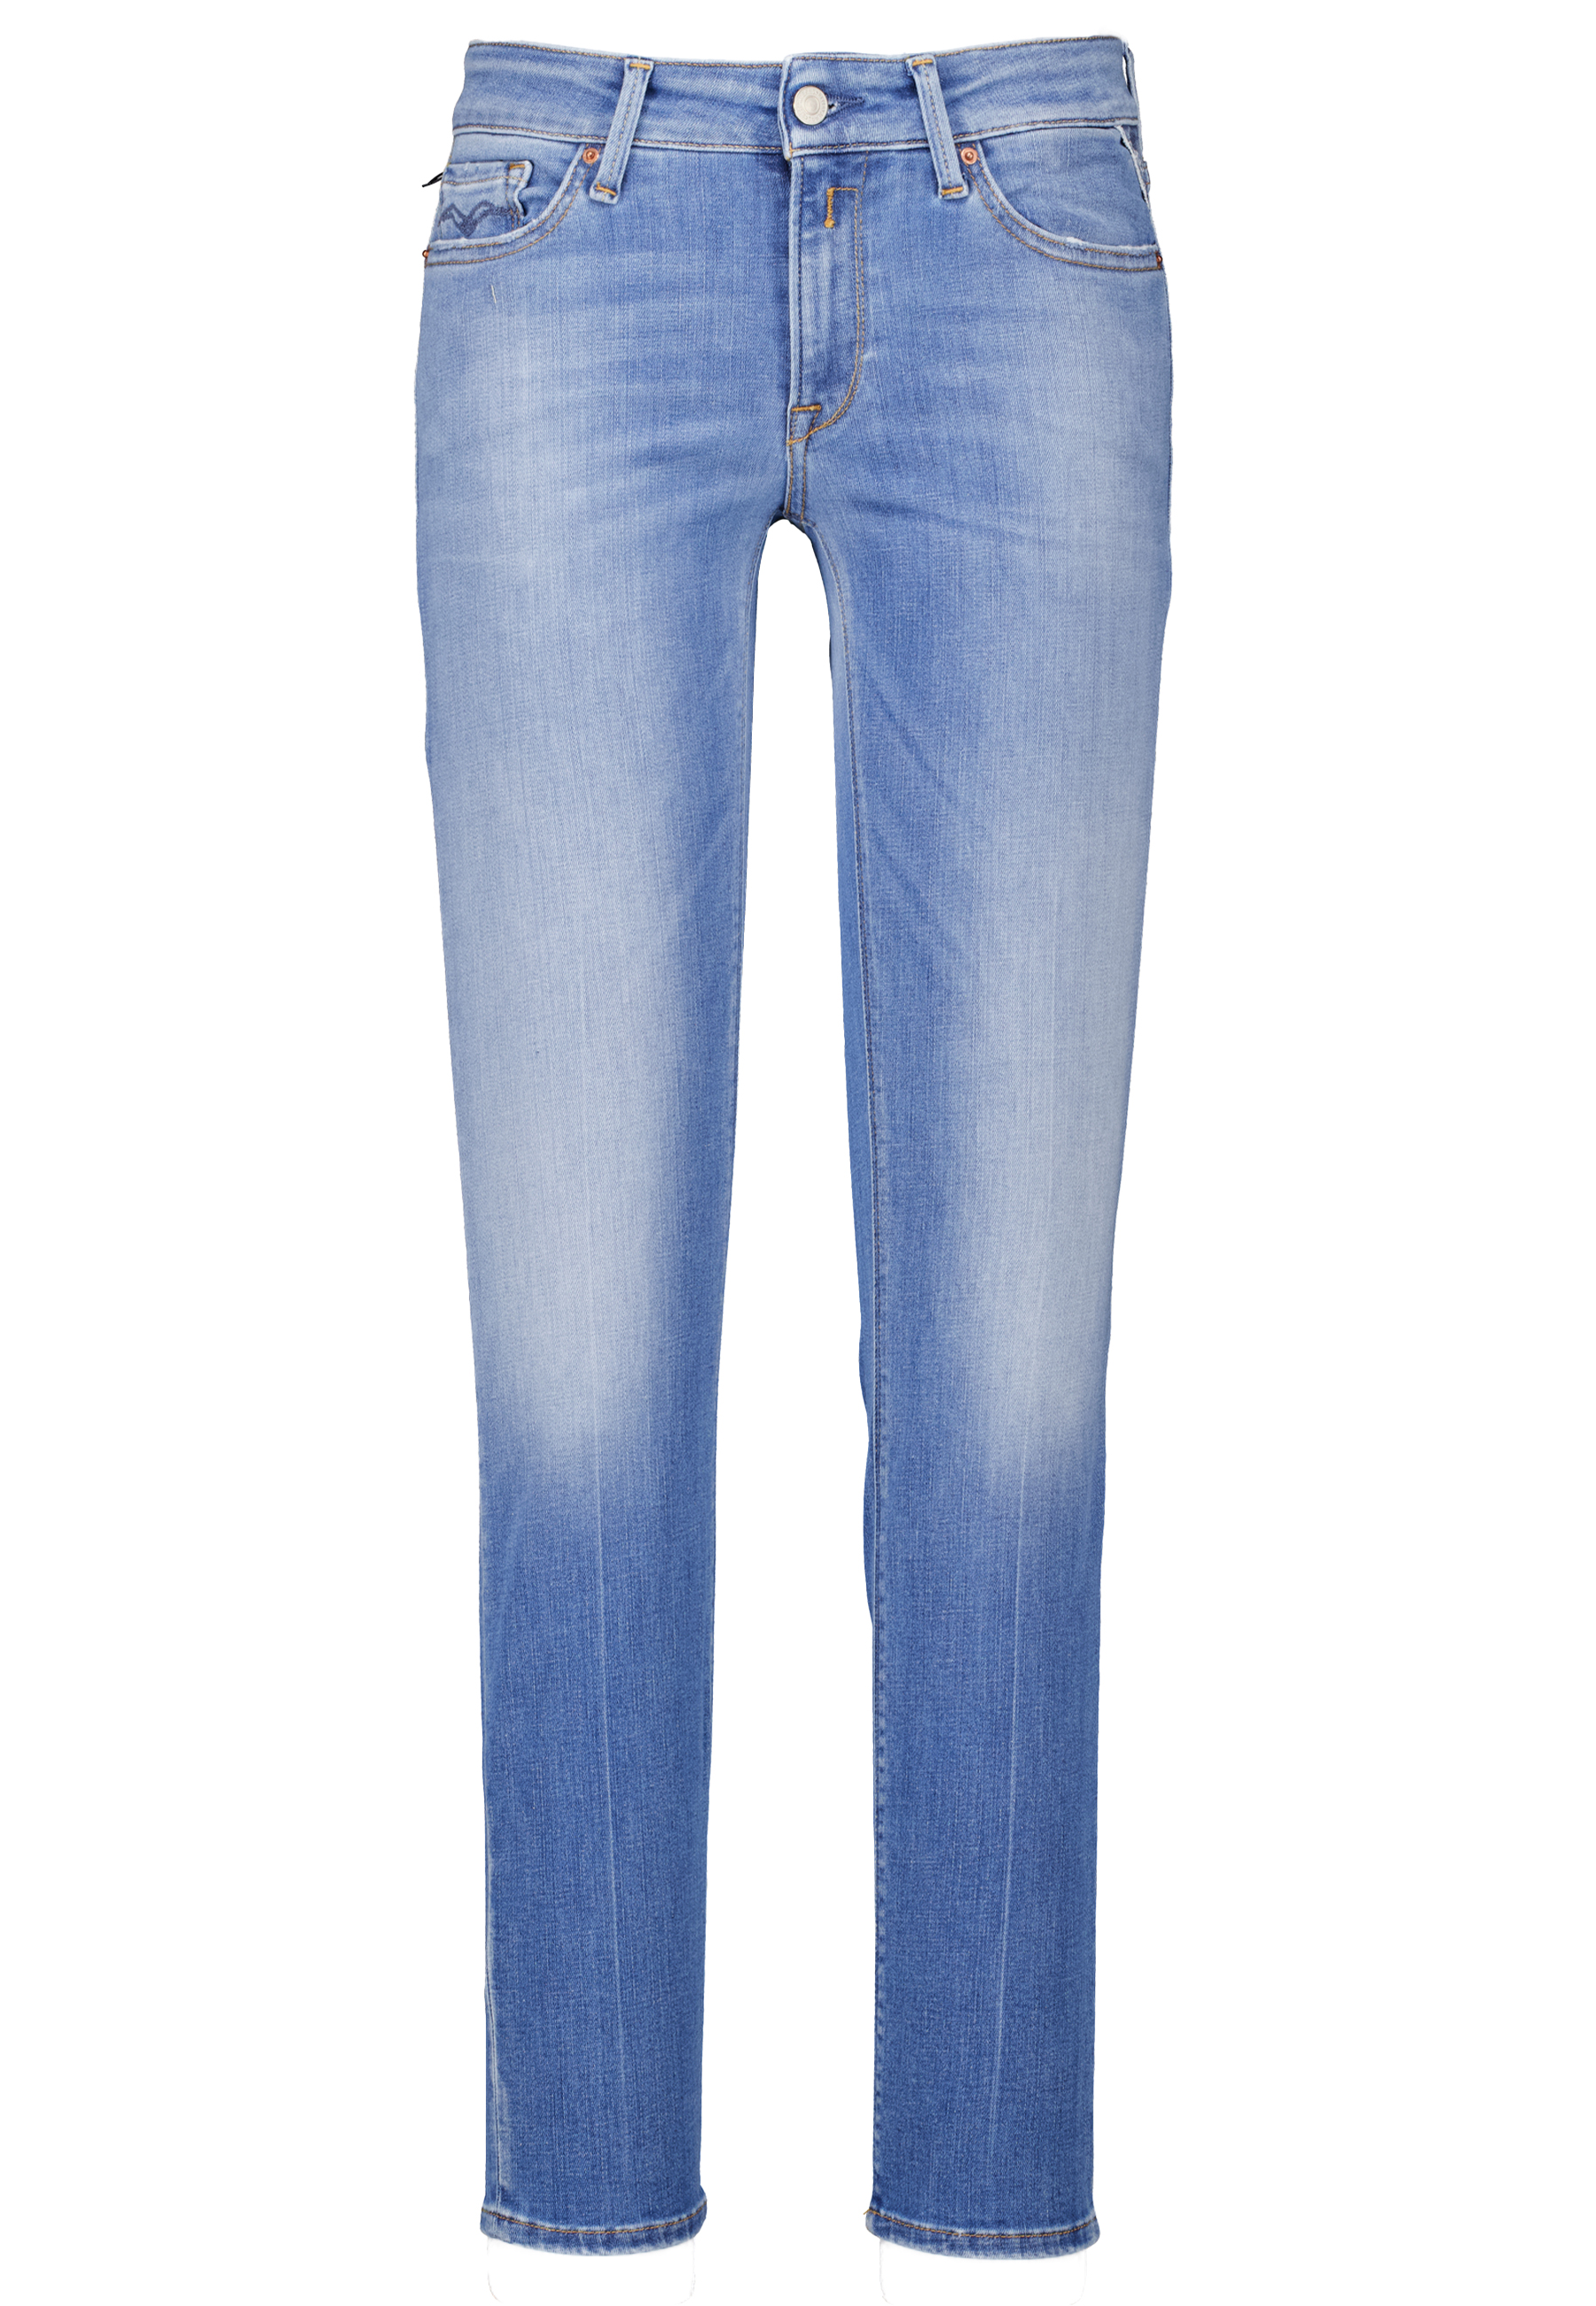 Replay jeans jeans Dames maat 30/30